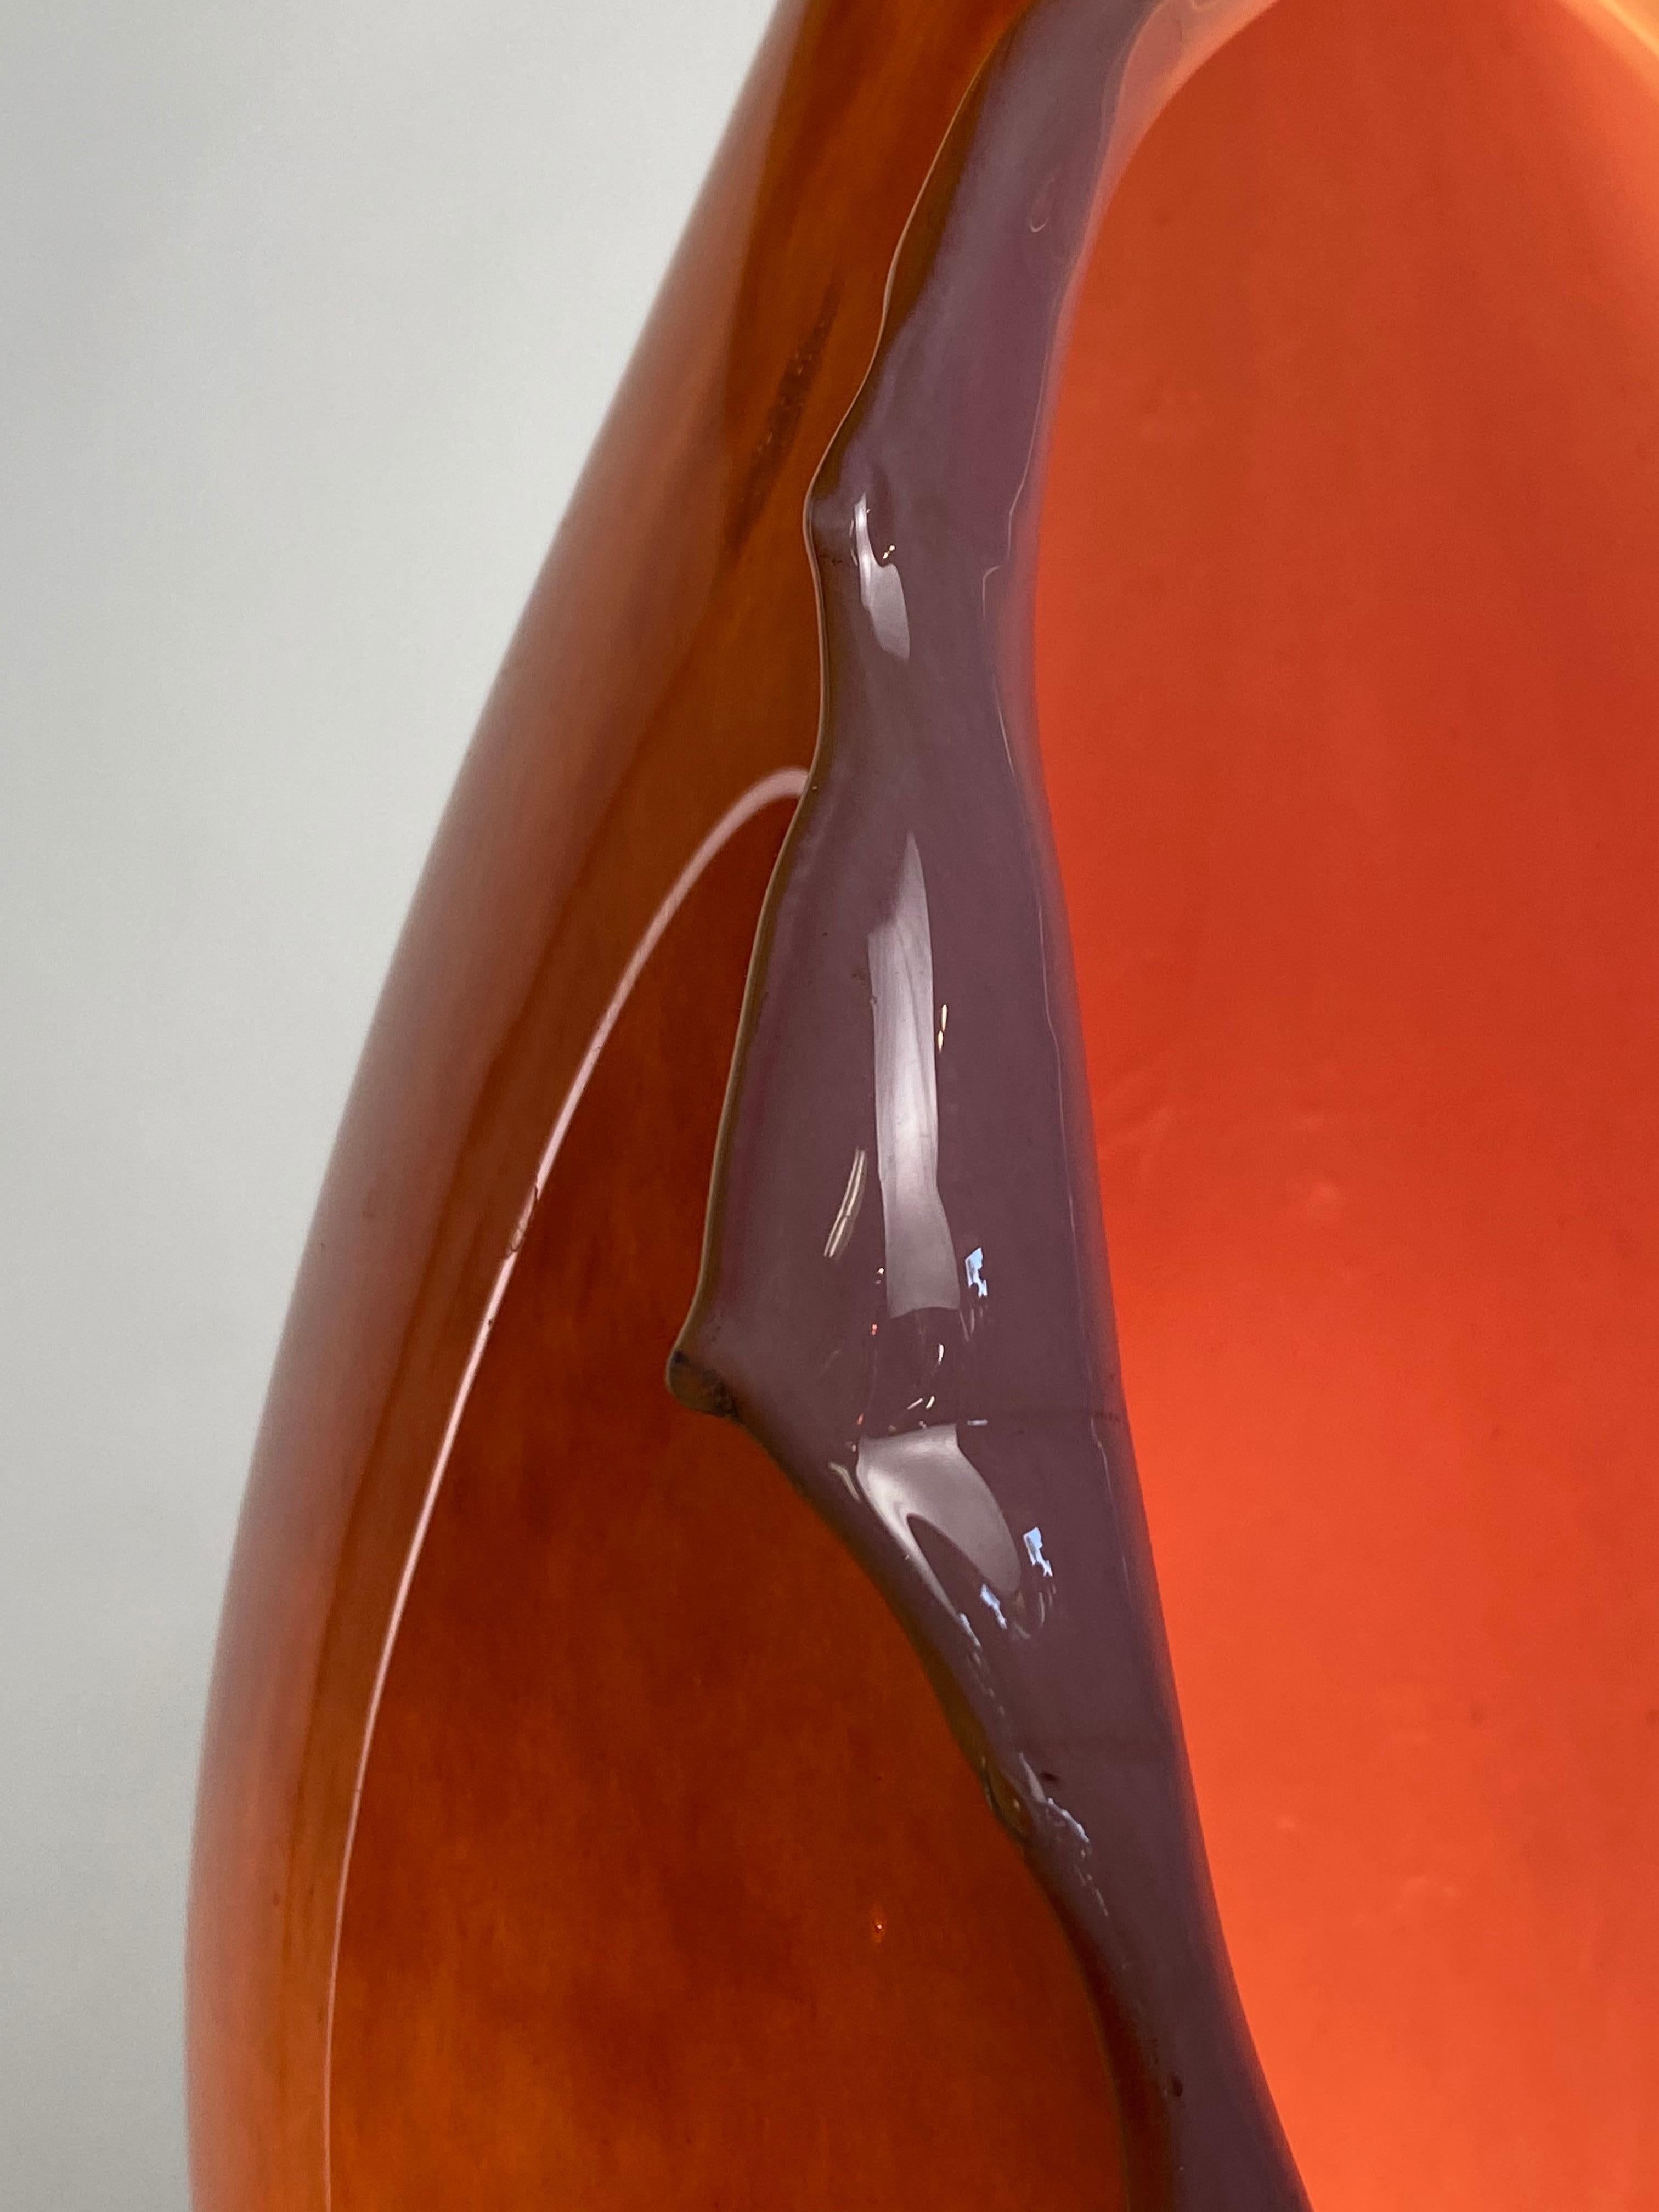 Contemporary Blown Glass Pink and Orange Lamp Pendent Light, 21st Century by Mattia Biagi For Sale